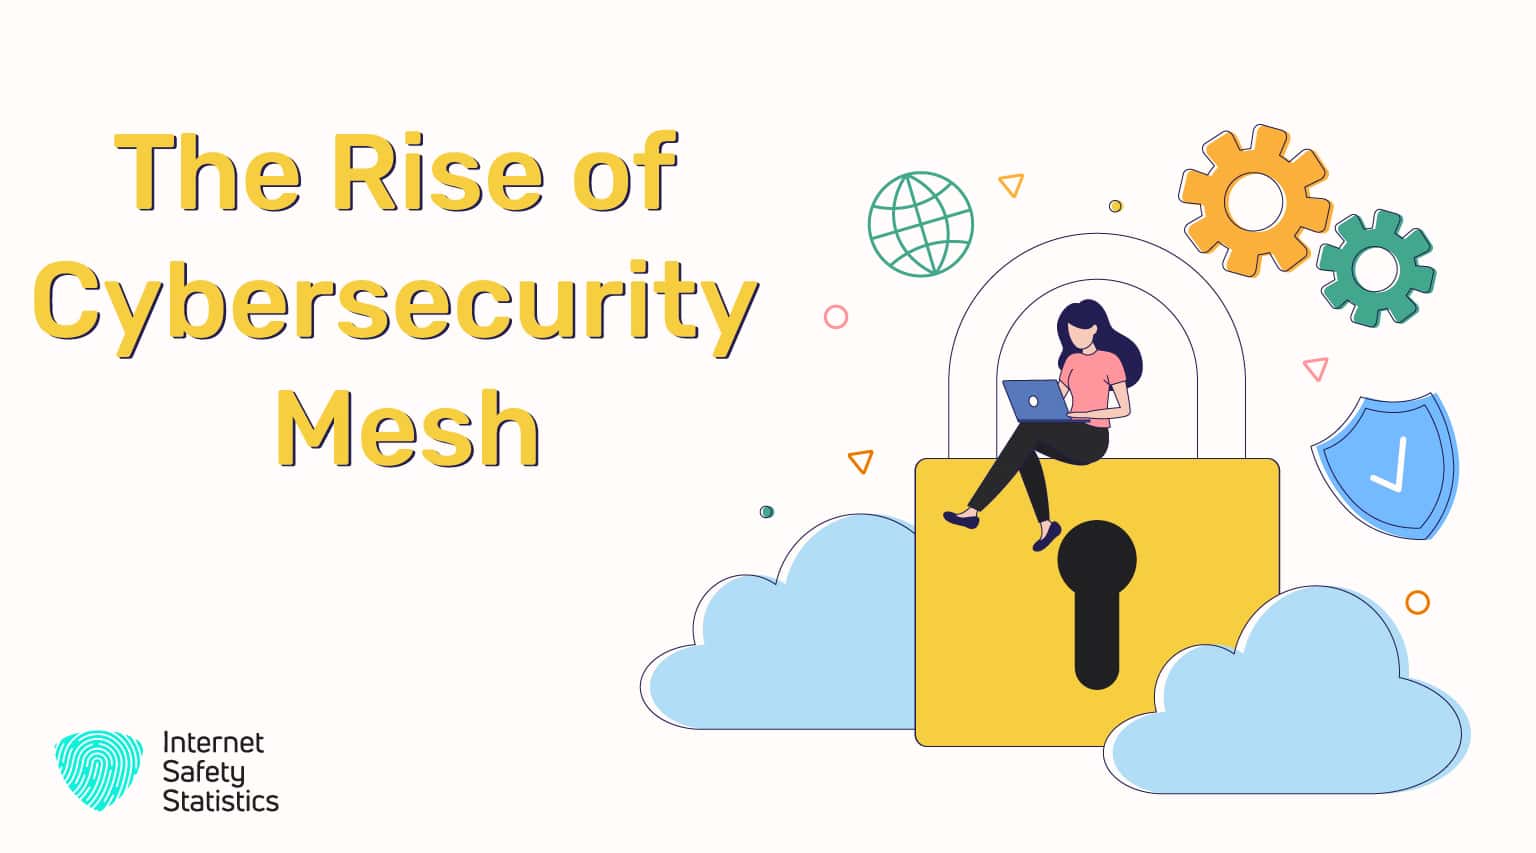 The Rise of Cybersecurity Mesh